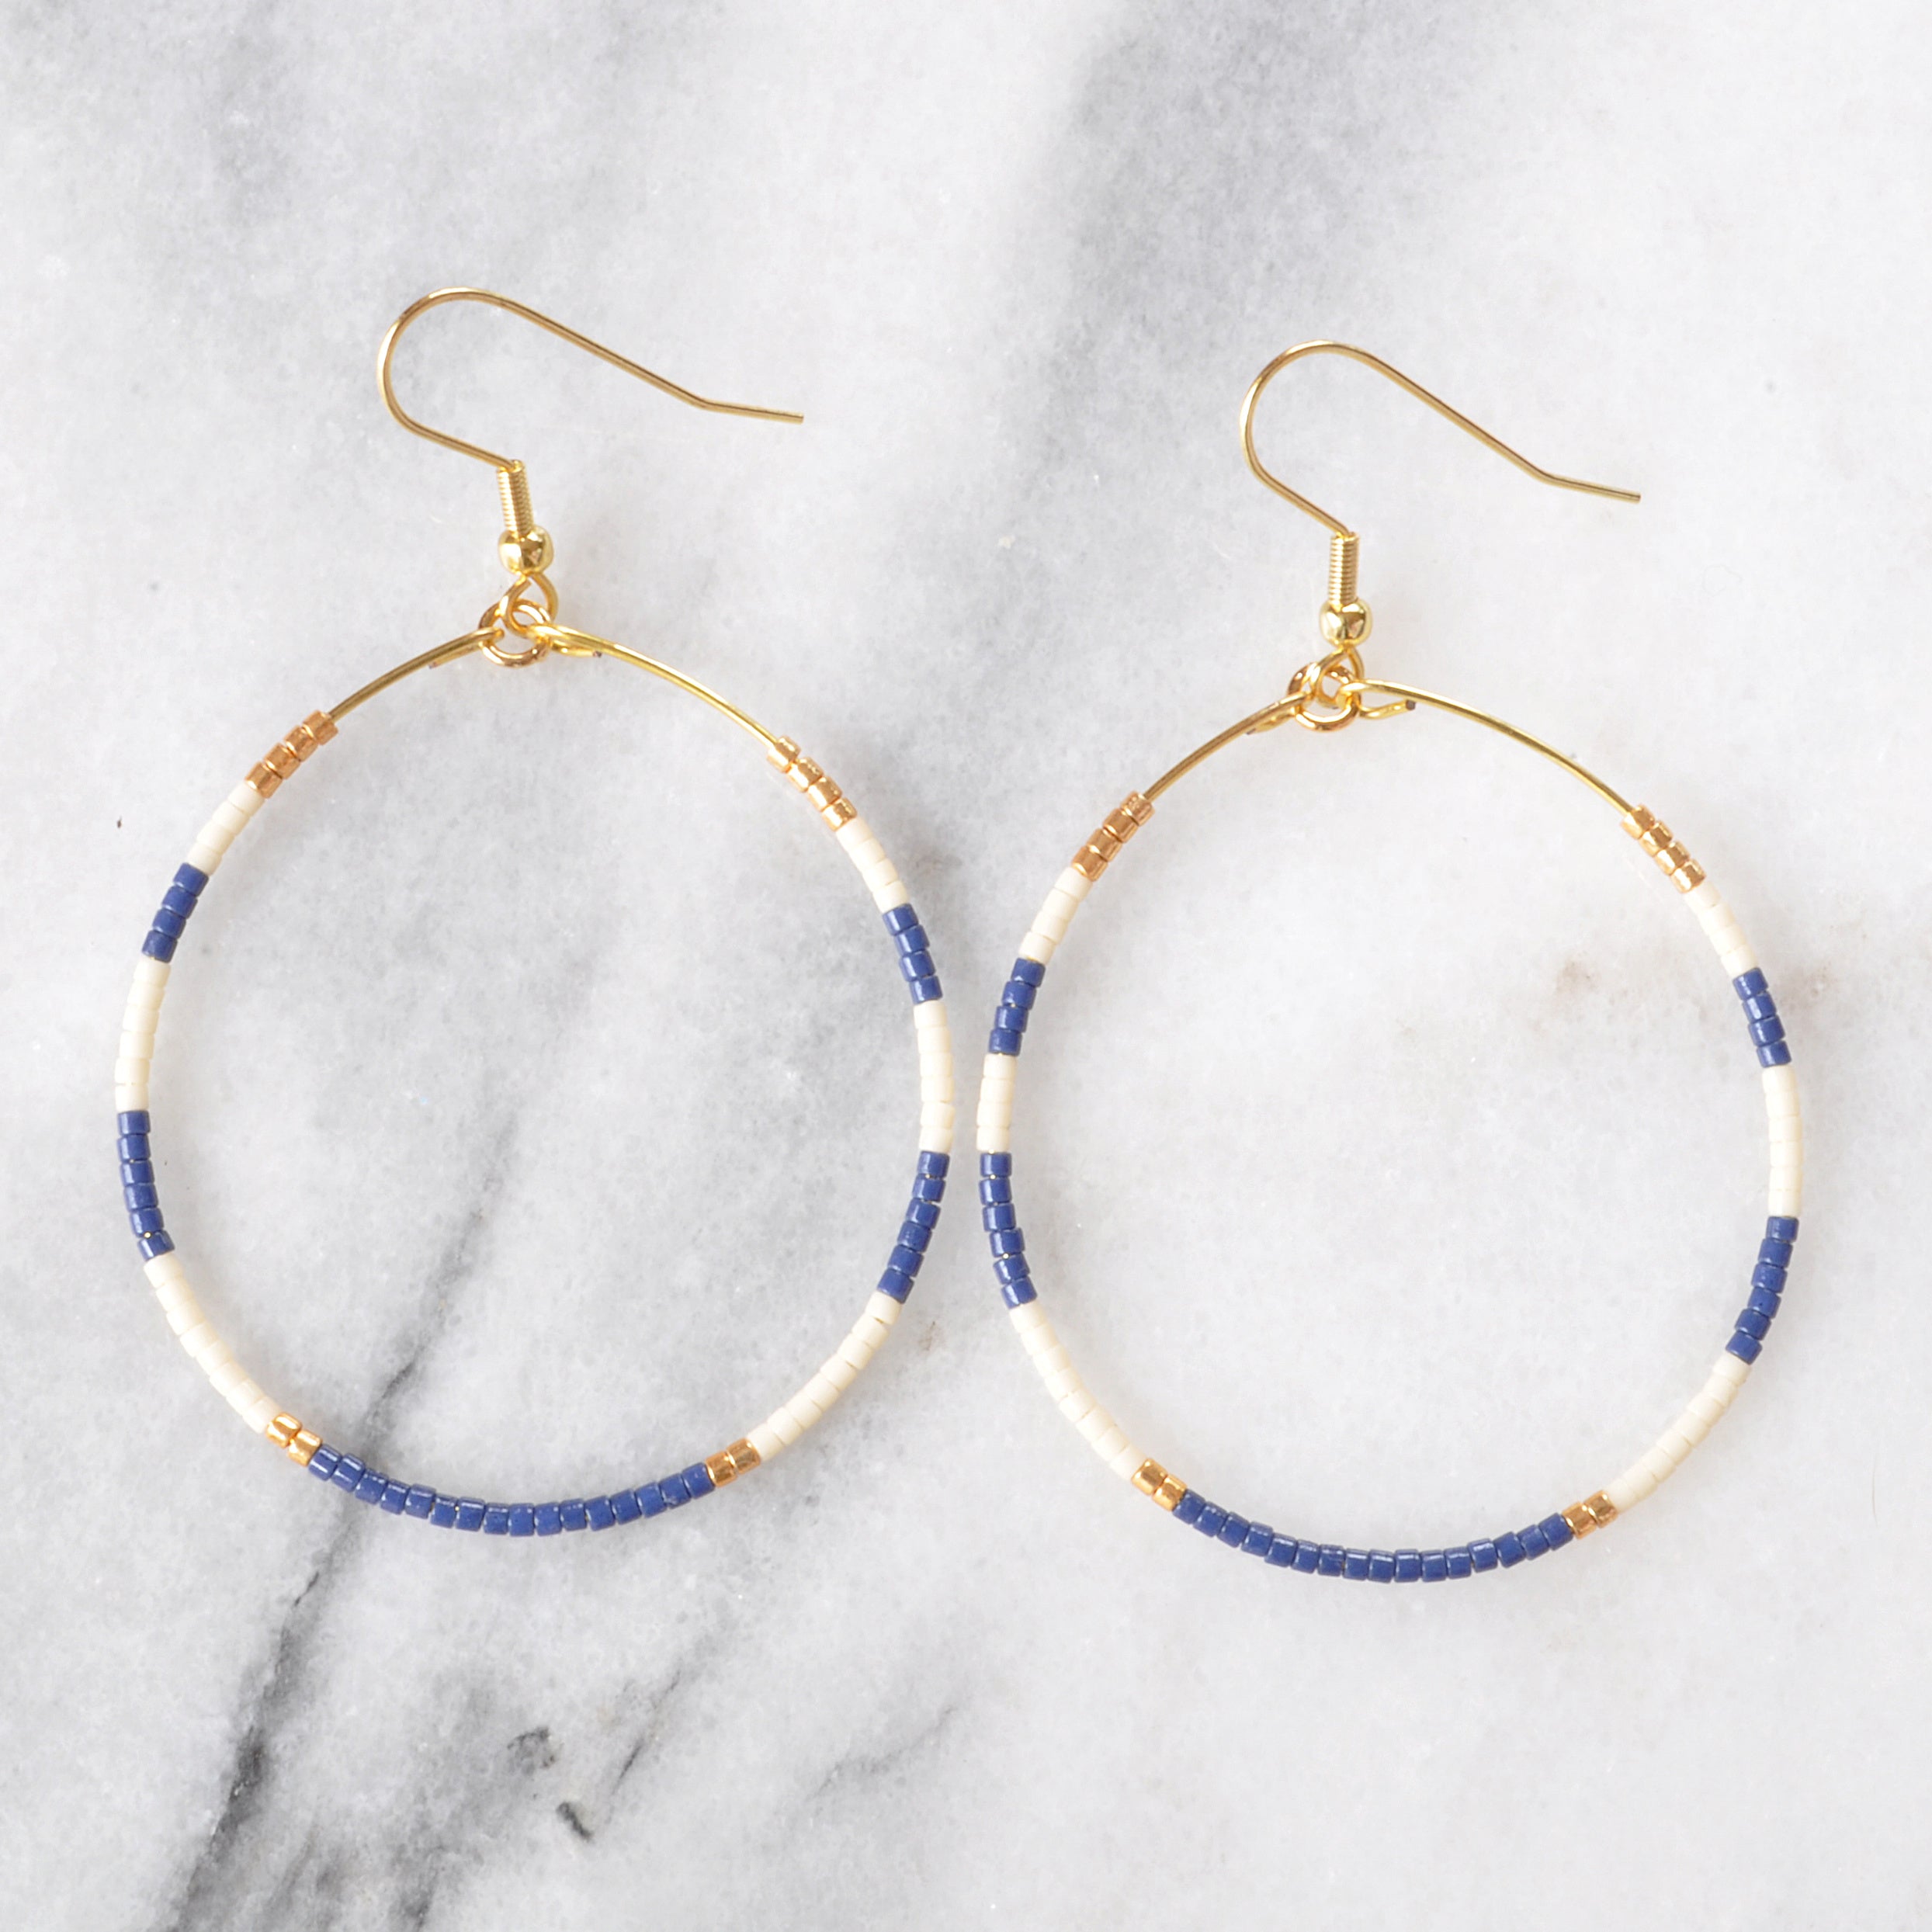 Victoria Mixed Seed Bead Hoop Earrings Blue + White by INK+ALLOY